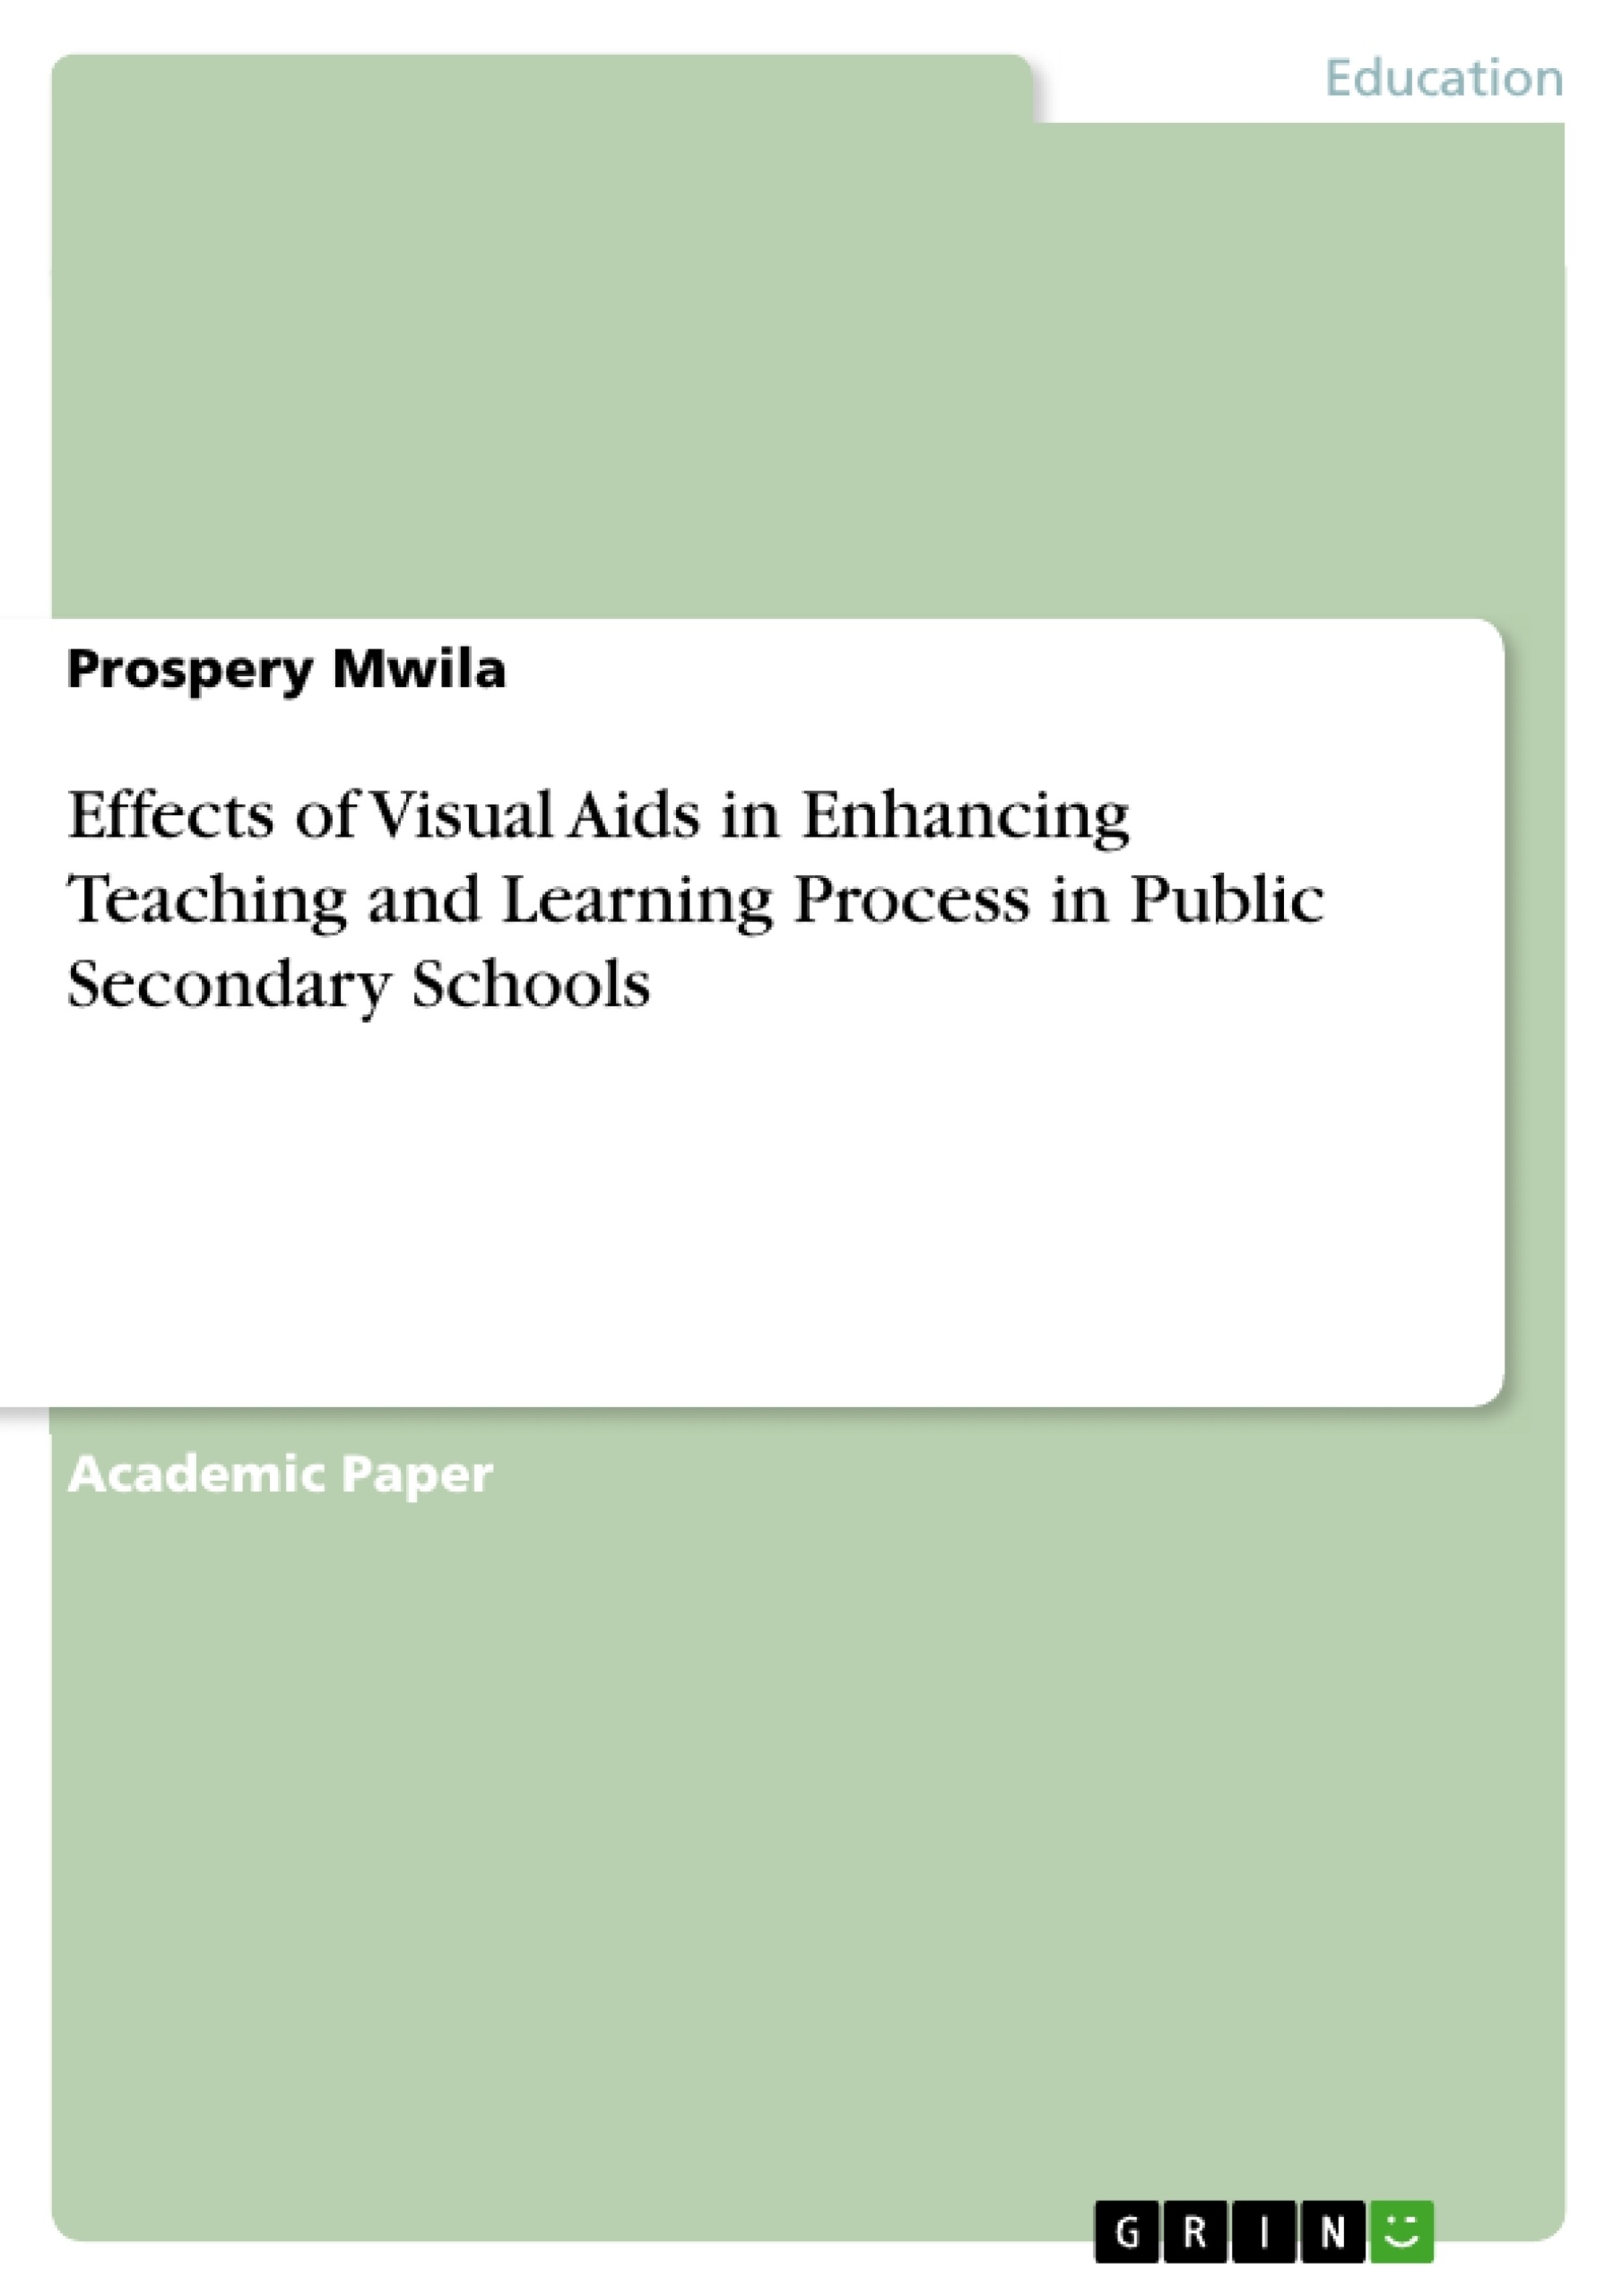 Title: Effects of Visual Aids in Enhancing Teaching and Learning Process in Public Secondary Schools